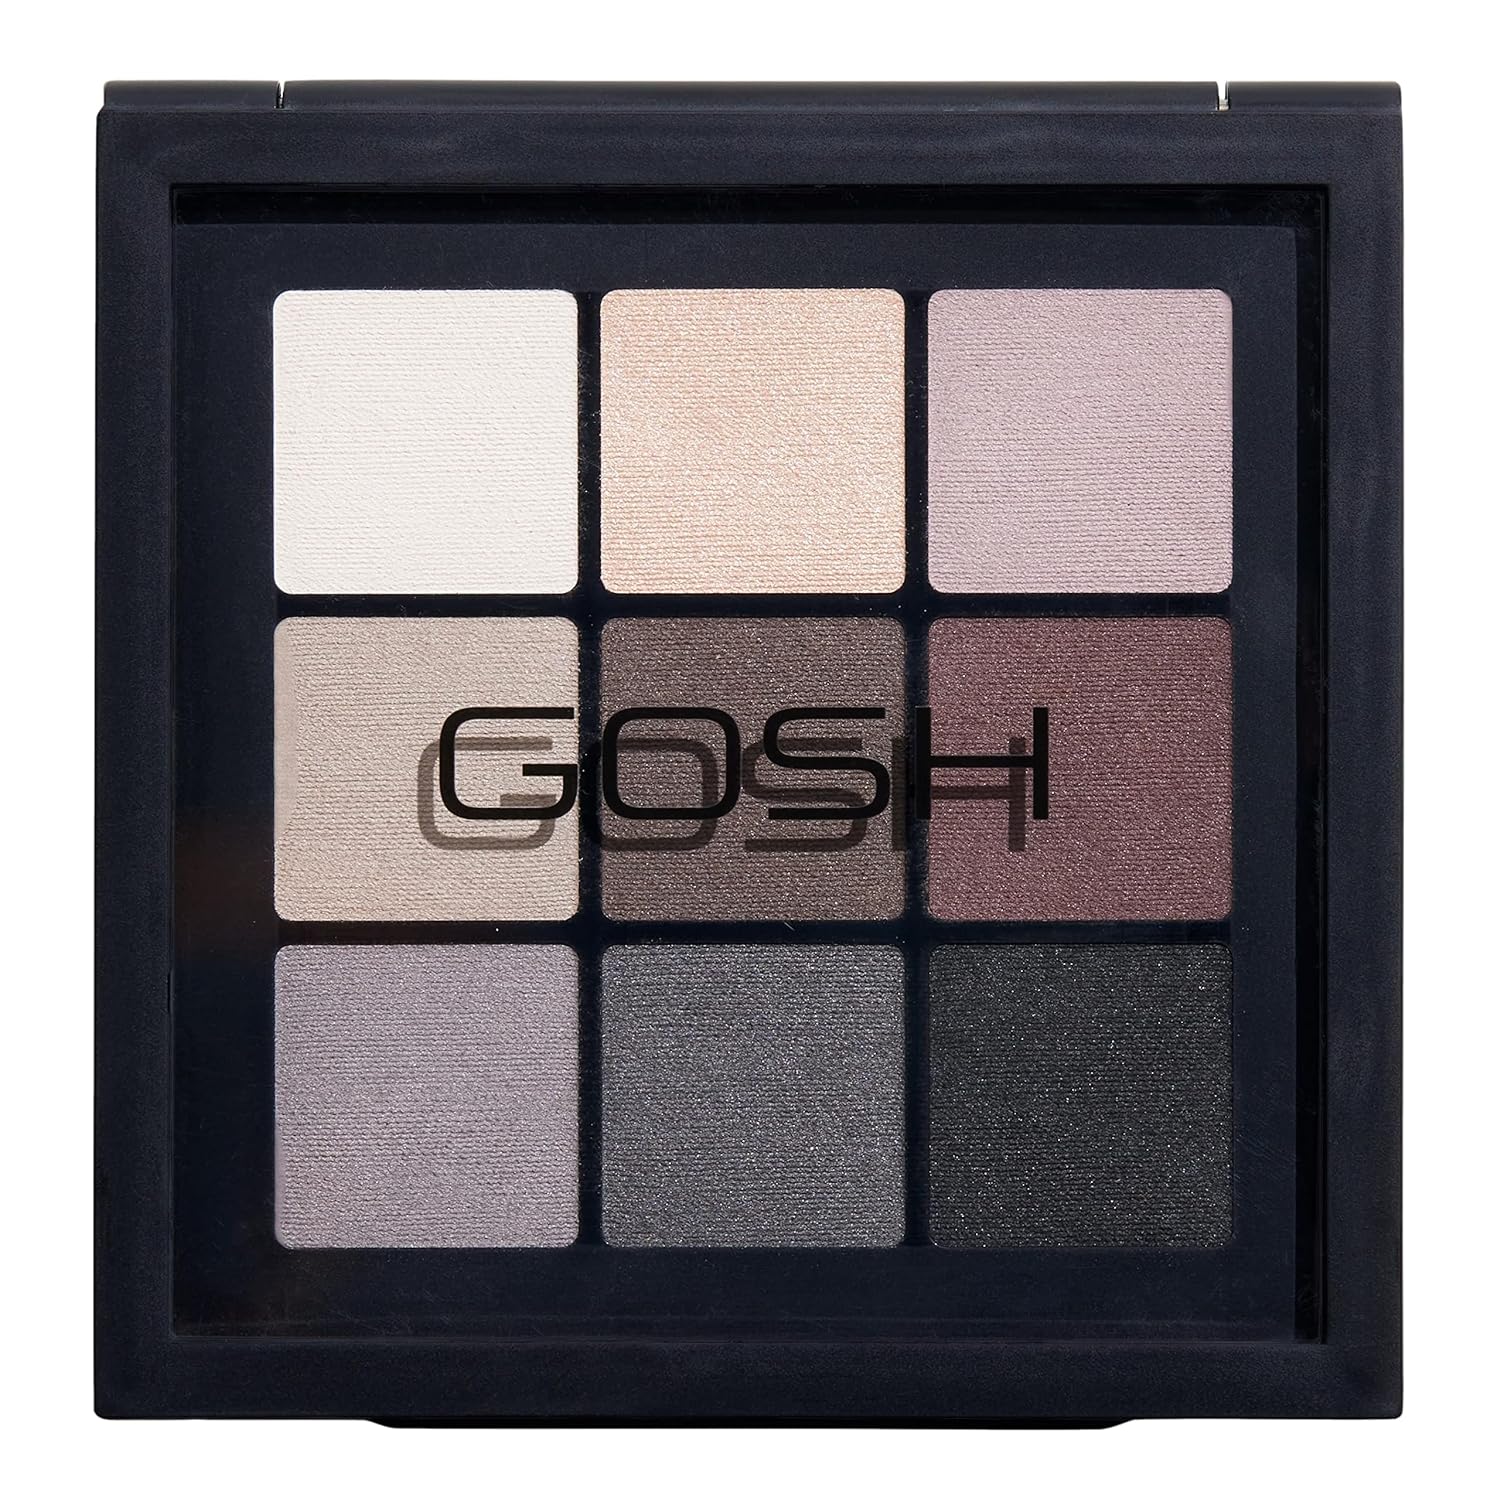 Gosh Eyedity Vegan Eyeshadow Palette with 9 Perfectly Matched Color in Matt & Metallic I Can Be Combined For Day Makeup & Glittering Looks for the Evening I Fribrance-Free I 005 Be Hope